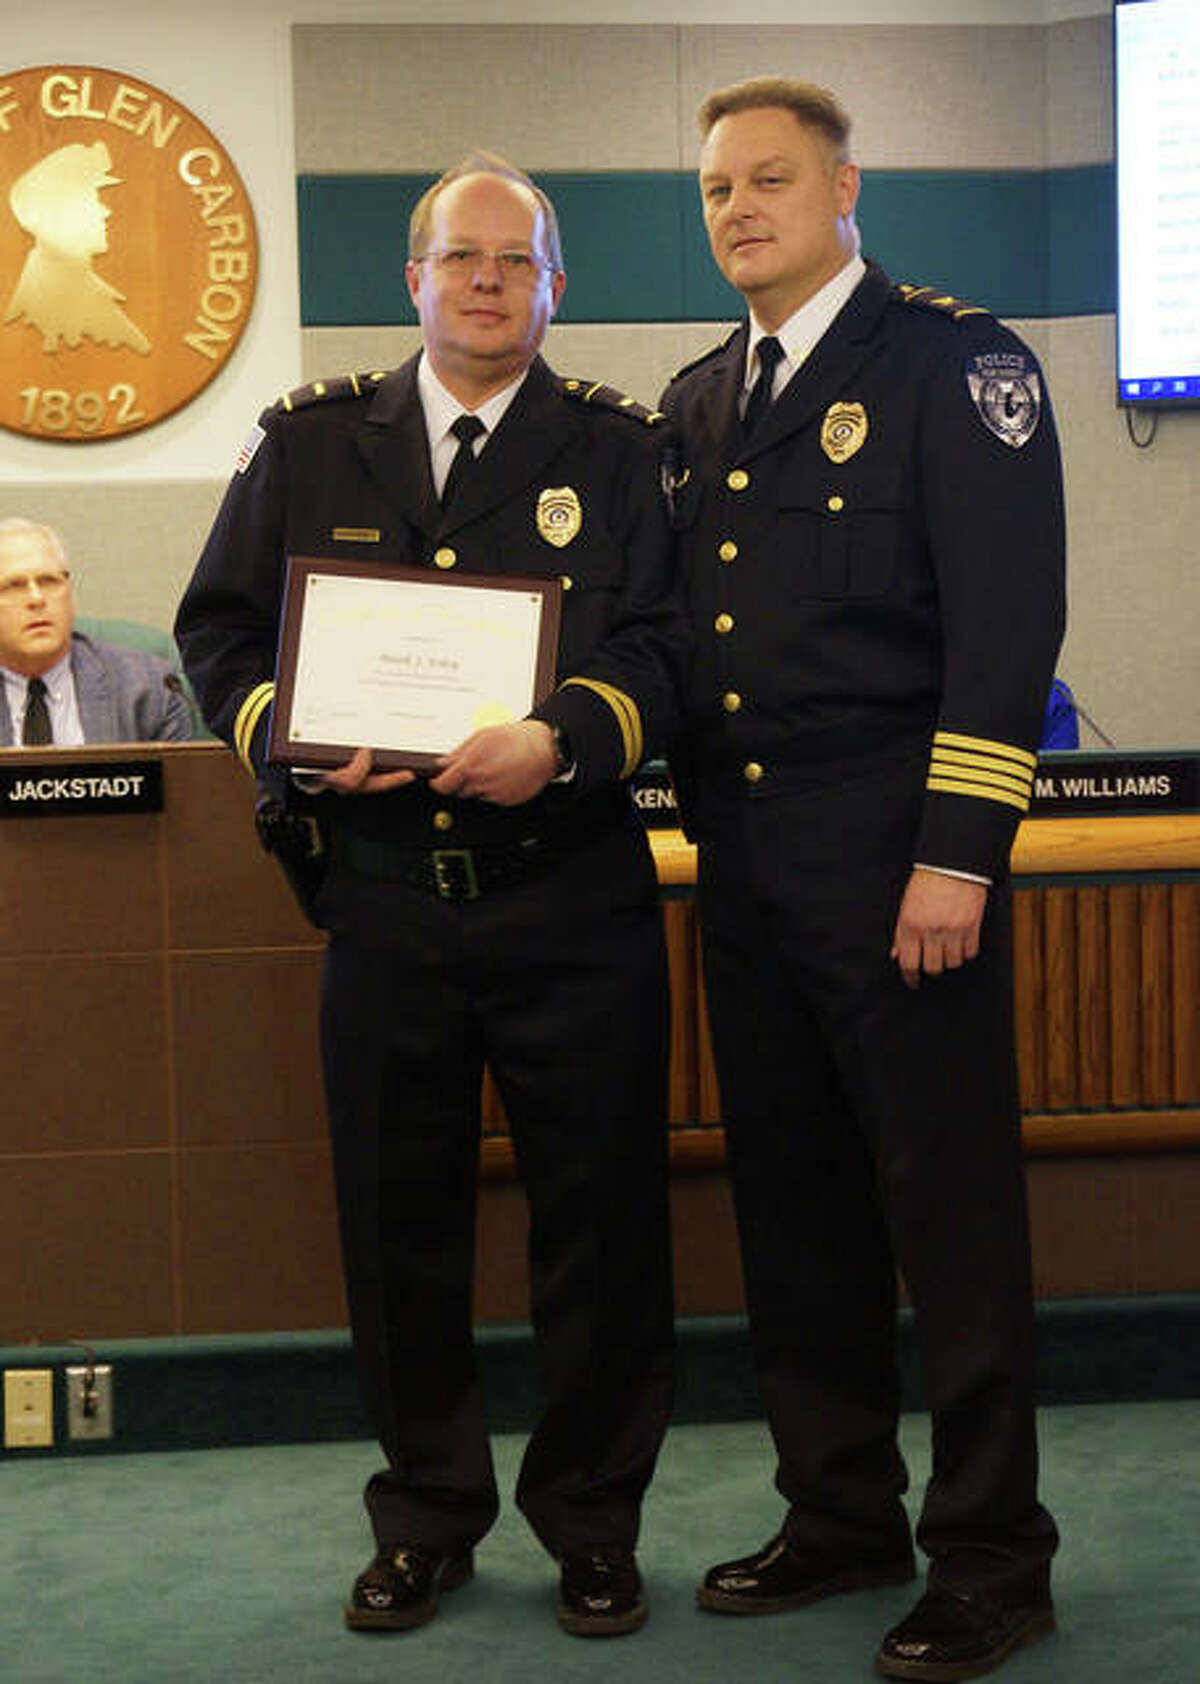 Glen Carbon Police Lt. Mark Foley received a plaque Tuesday, honoring him for 30 years of service to the department. With him is Police Chief Todd Link, right. In the background is Mayor Rob Jackstadt.